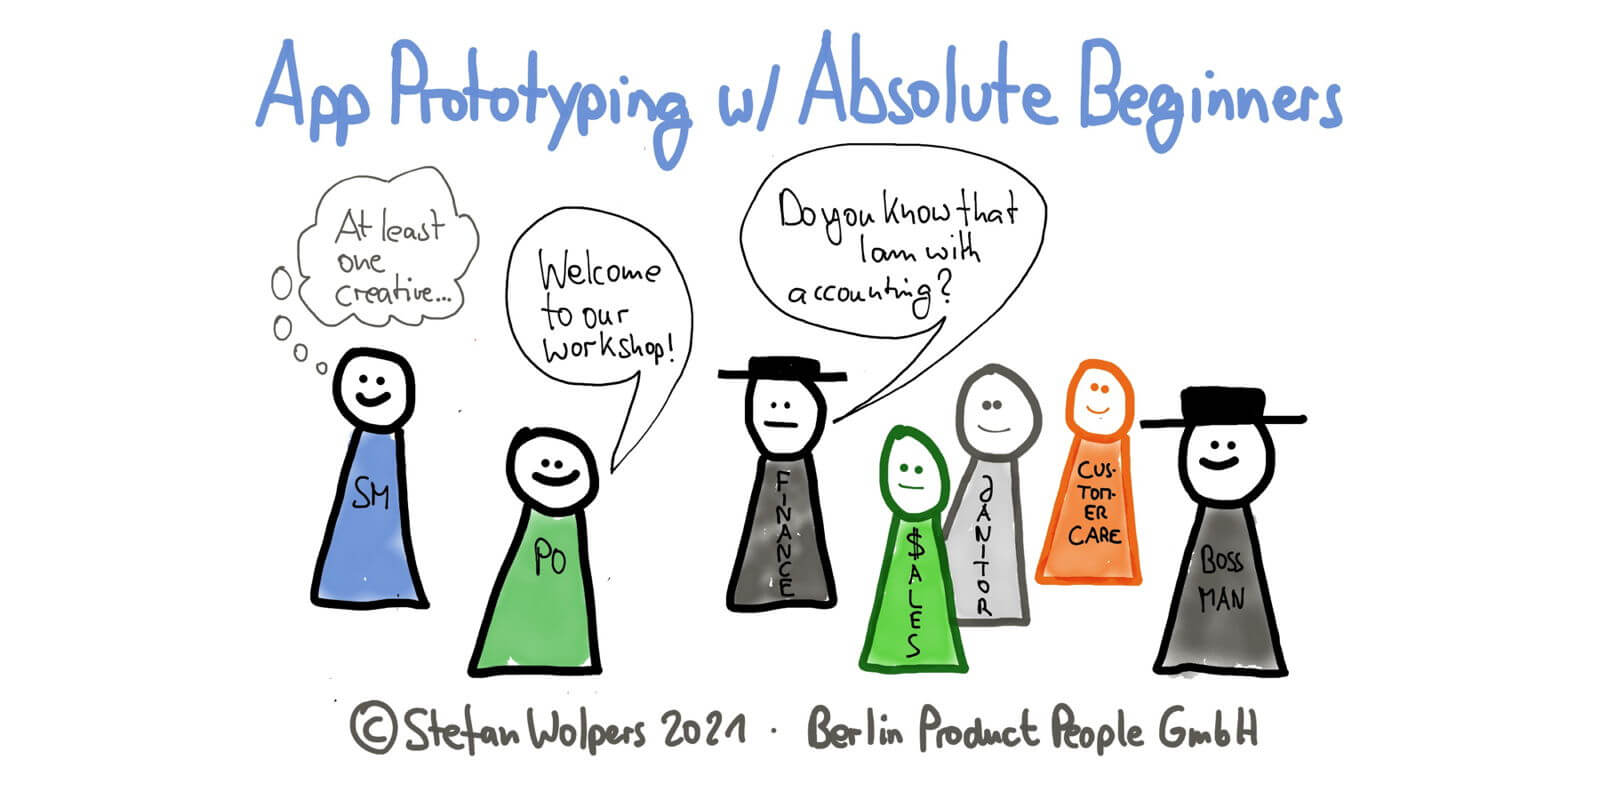 App Prototyping with Absolute Beginners – Creating a Shared Understanding of How Empiricism Works — Age-of-Product.com